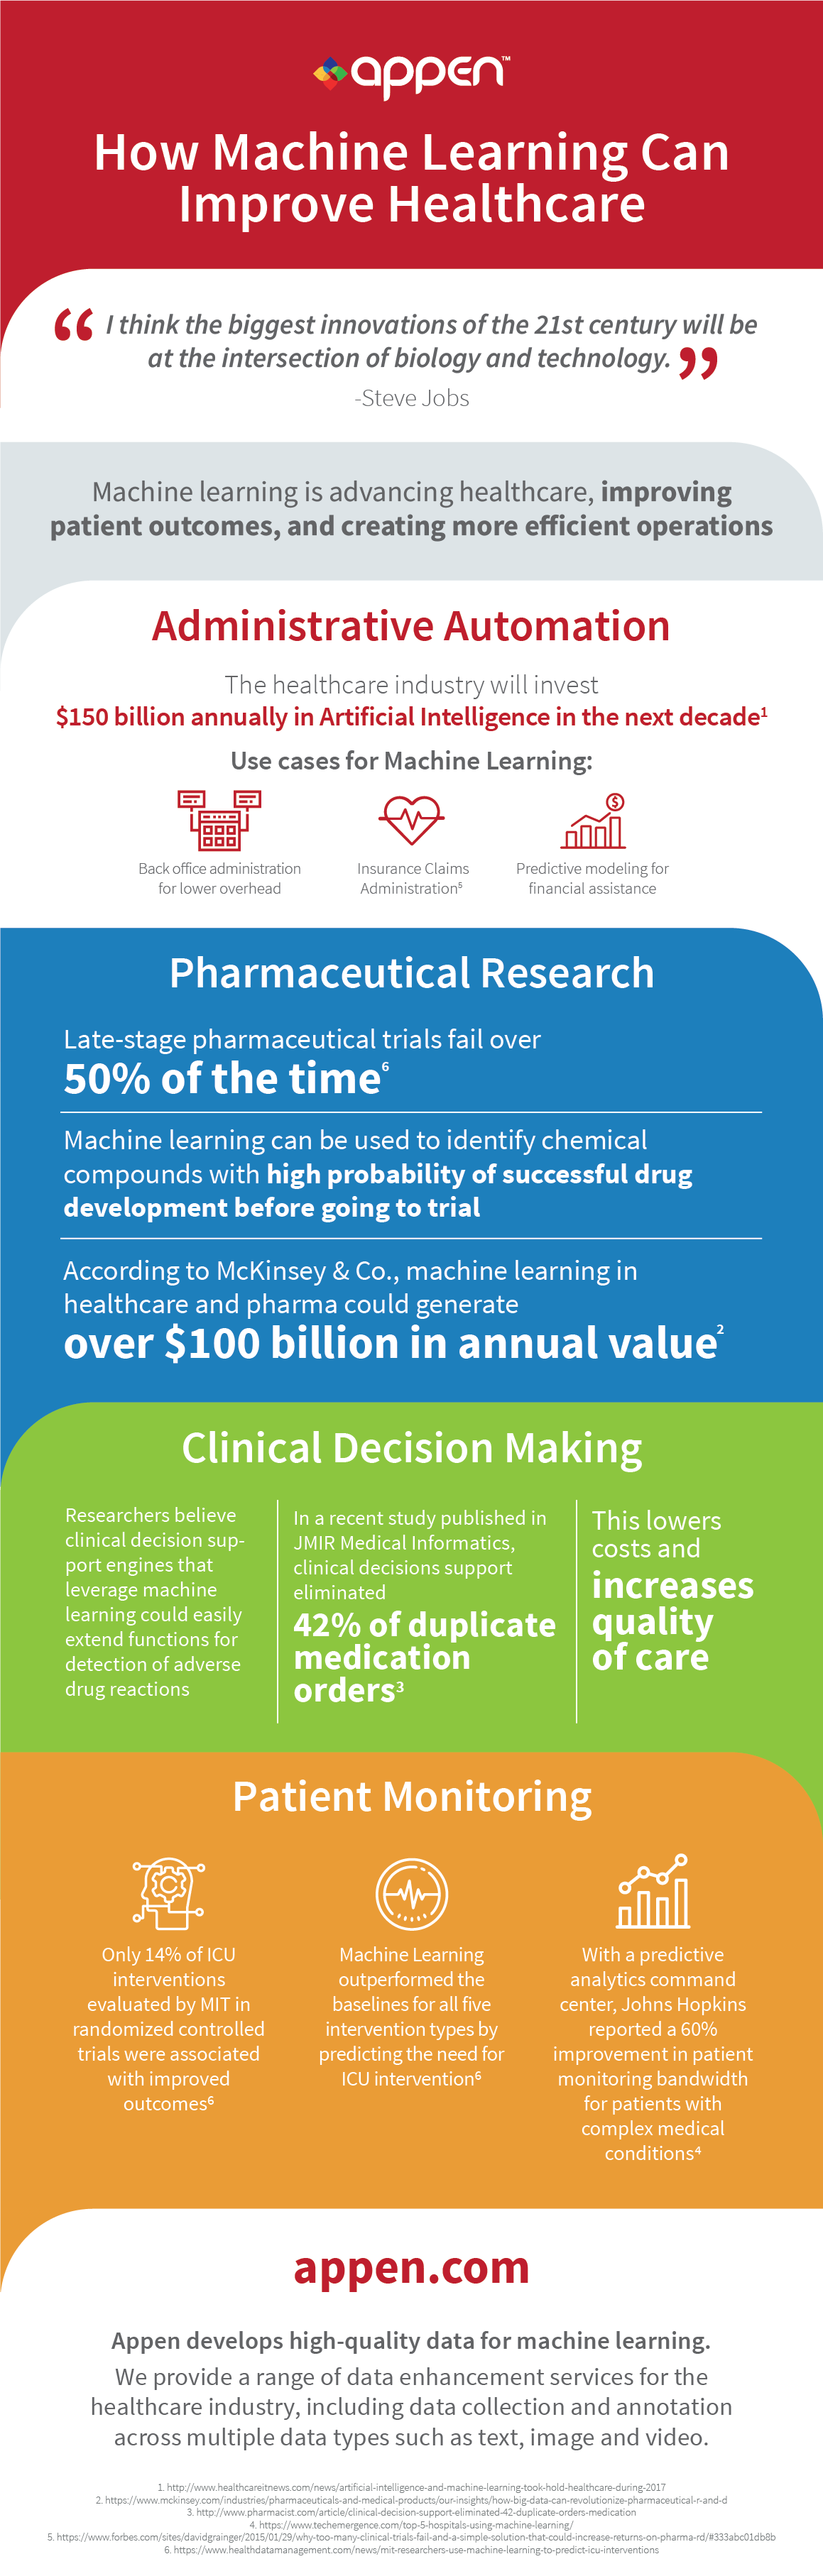 Appen How Machine Learning Can Improve Healthcare infographic